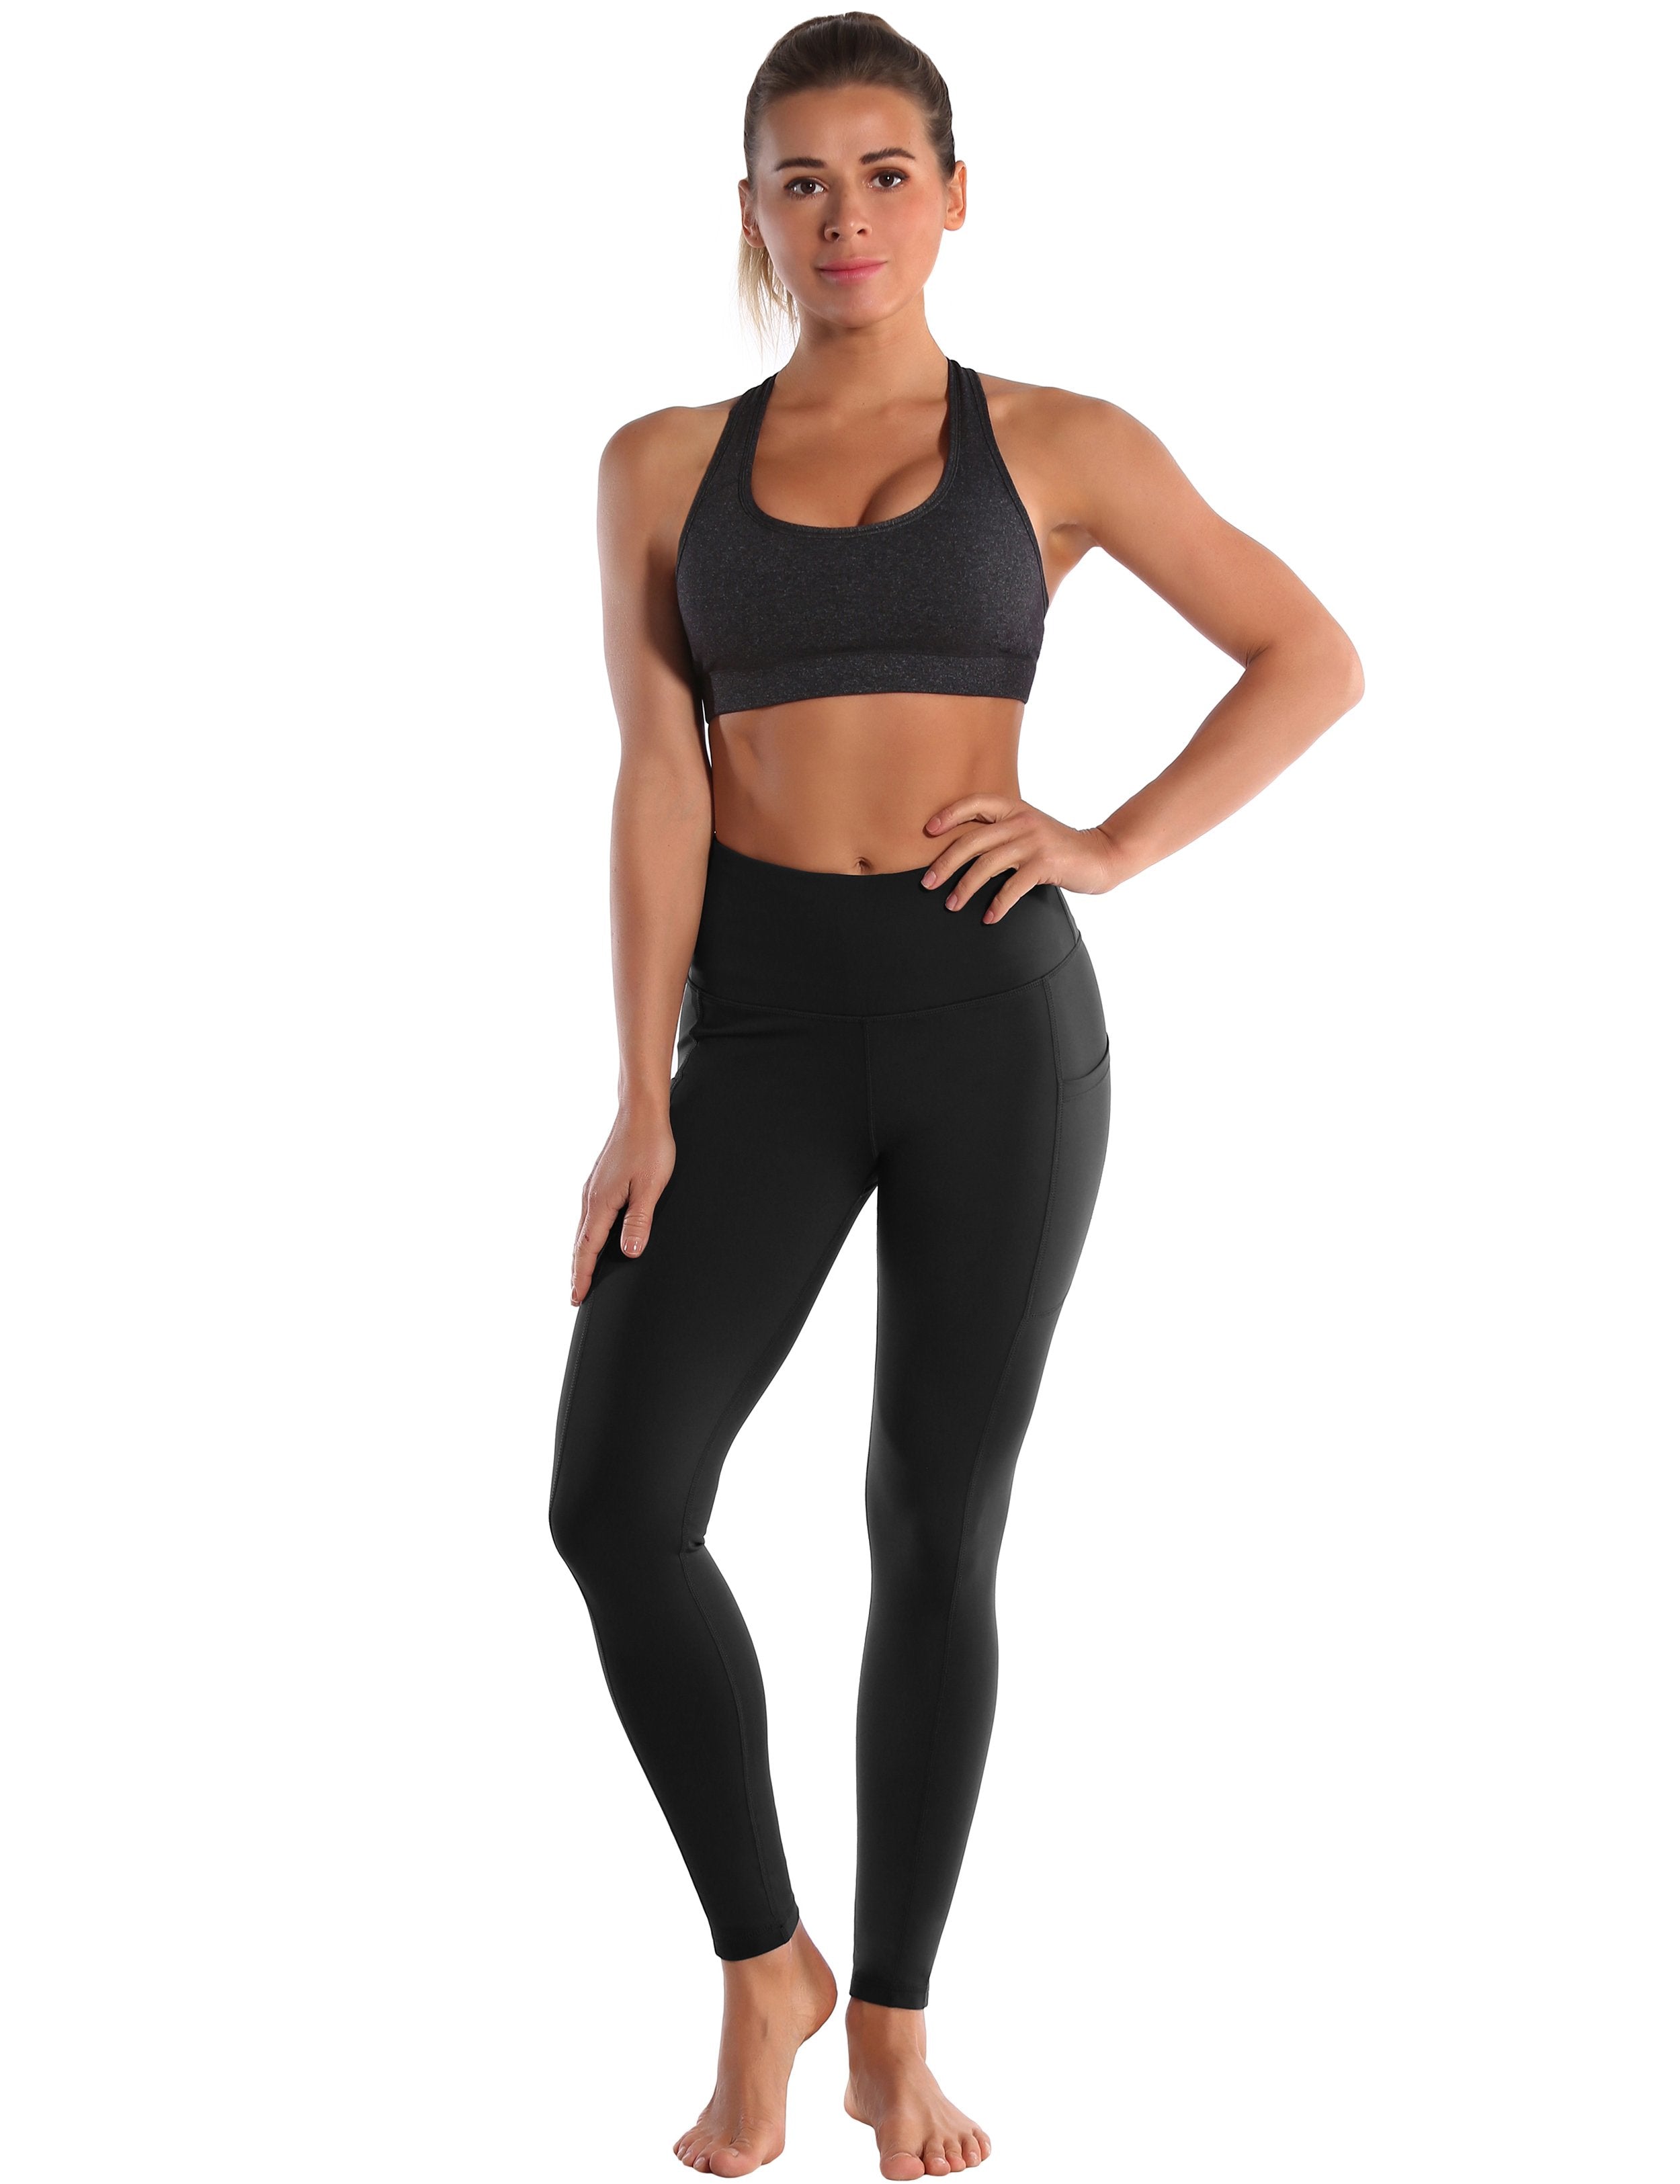 Hip Line Side Pockets Golf Pants black Sexy Hip Line Side Pockets 75%Nylon/25%Spandex Fabric doesn't attract lint easily 4-way stretch No see-through Moisture-wicking Tummy control Inner pocket Two lengths